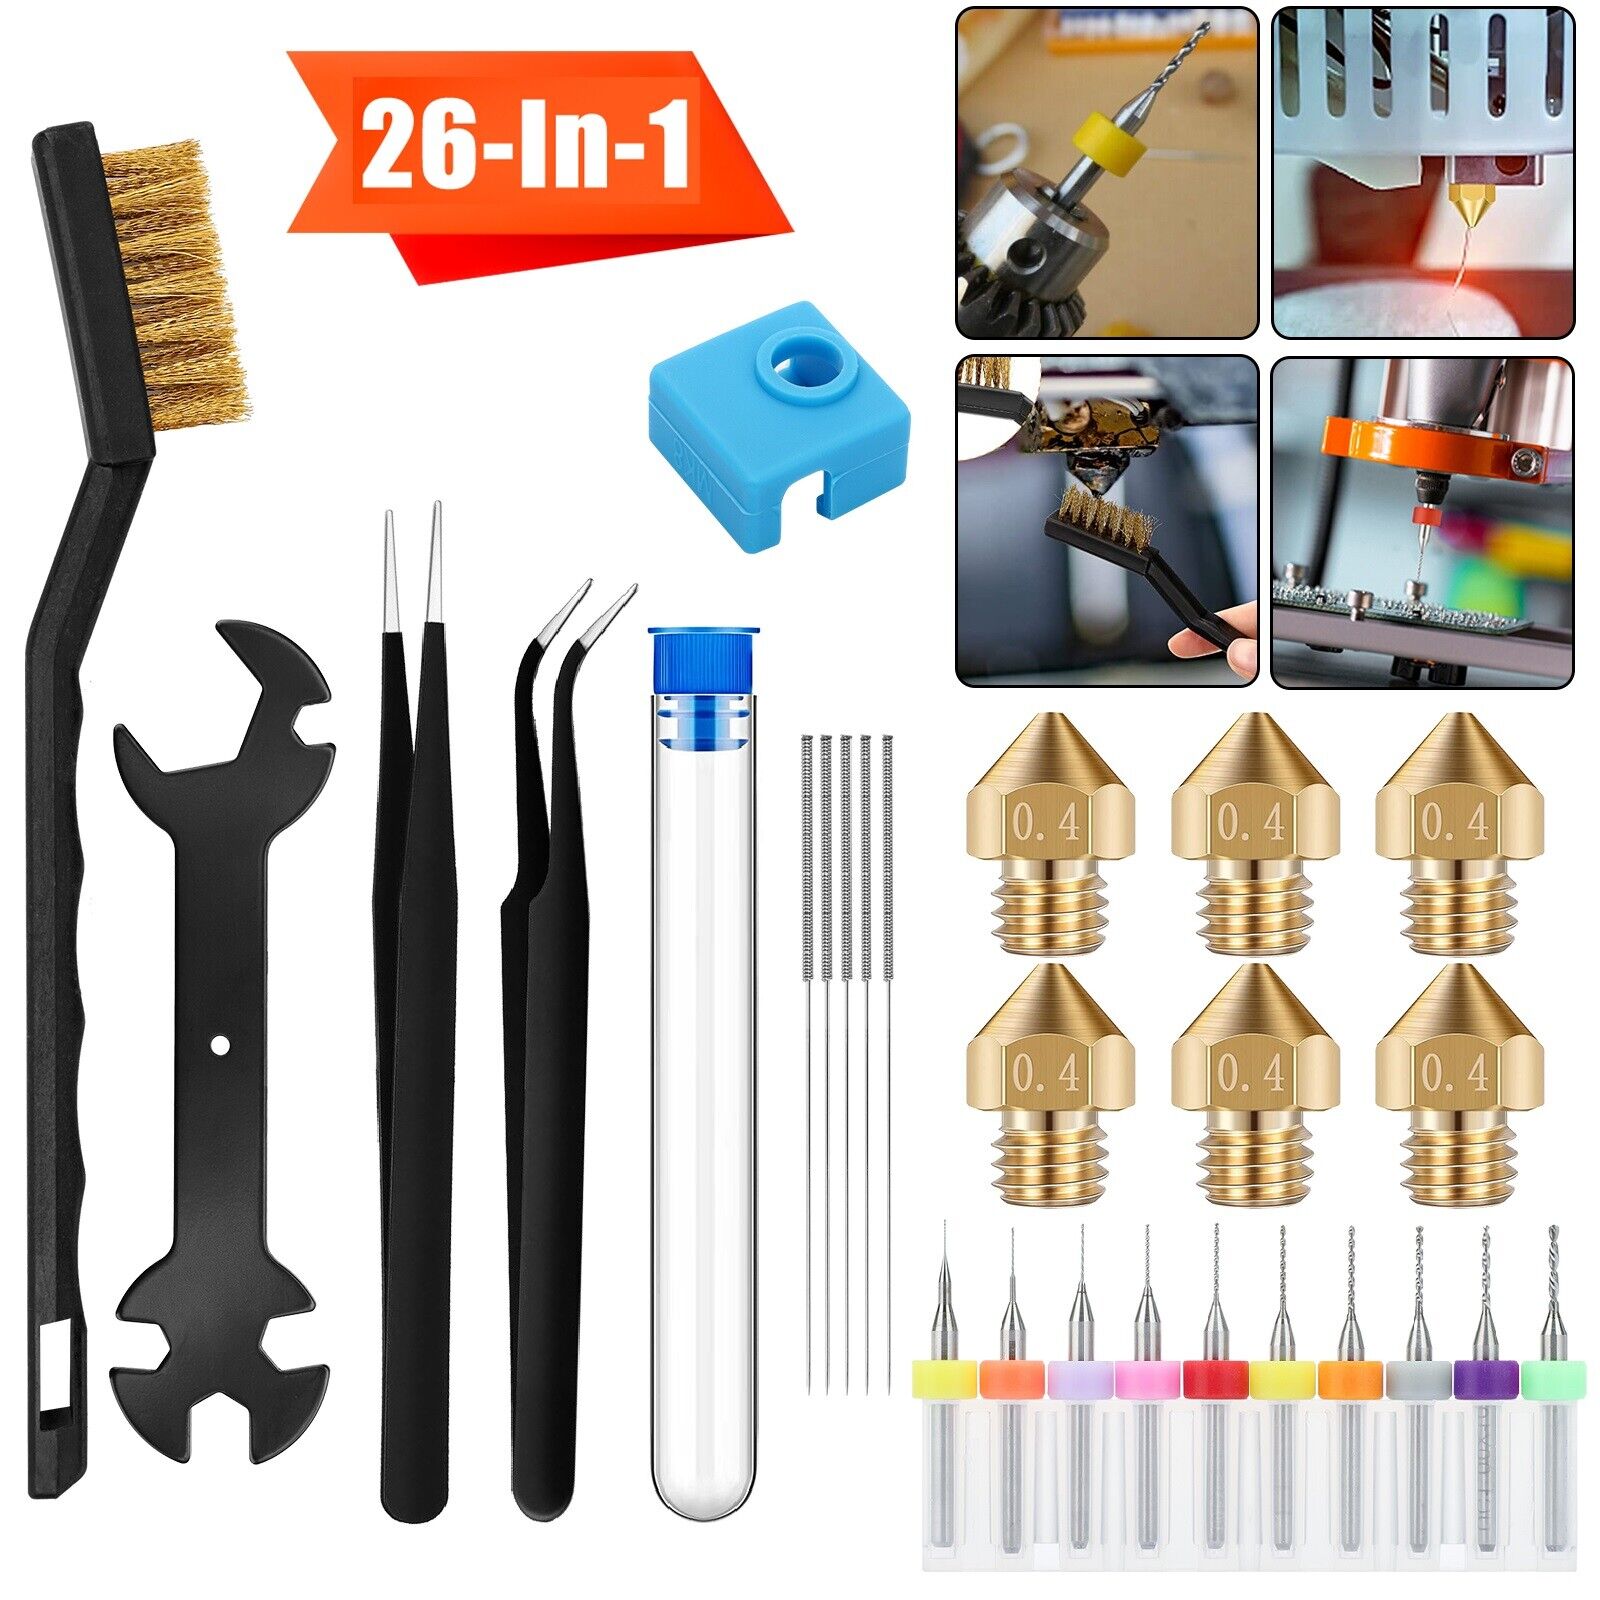 26PCS 3D Printer Ender Cleaning Wrench Tool Kit M6 Thread Mk8 Extruder Nozzles